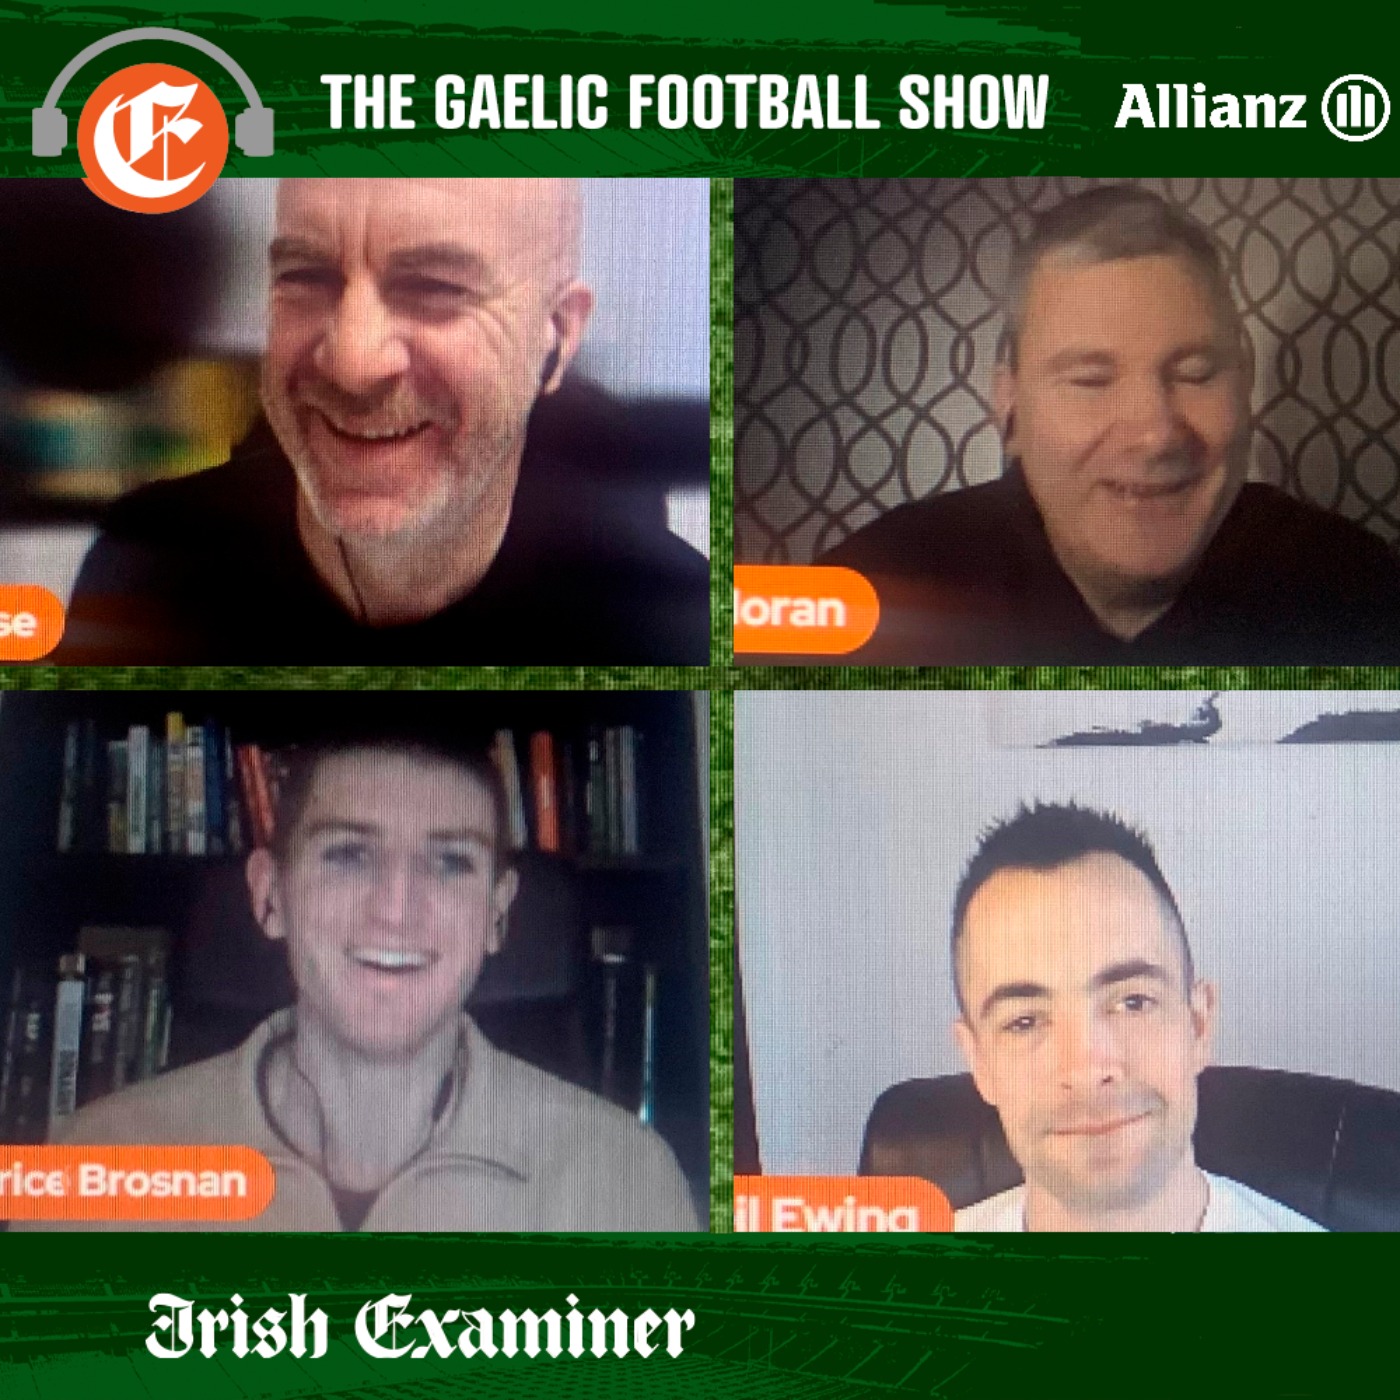 Allianz Football League Show:  The most open championship, the fear of relegation, and the power of begrudgery